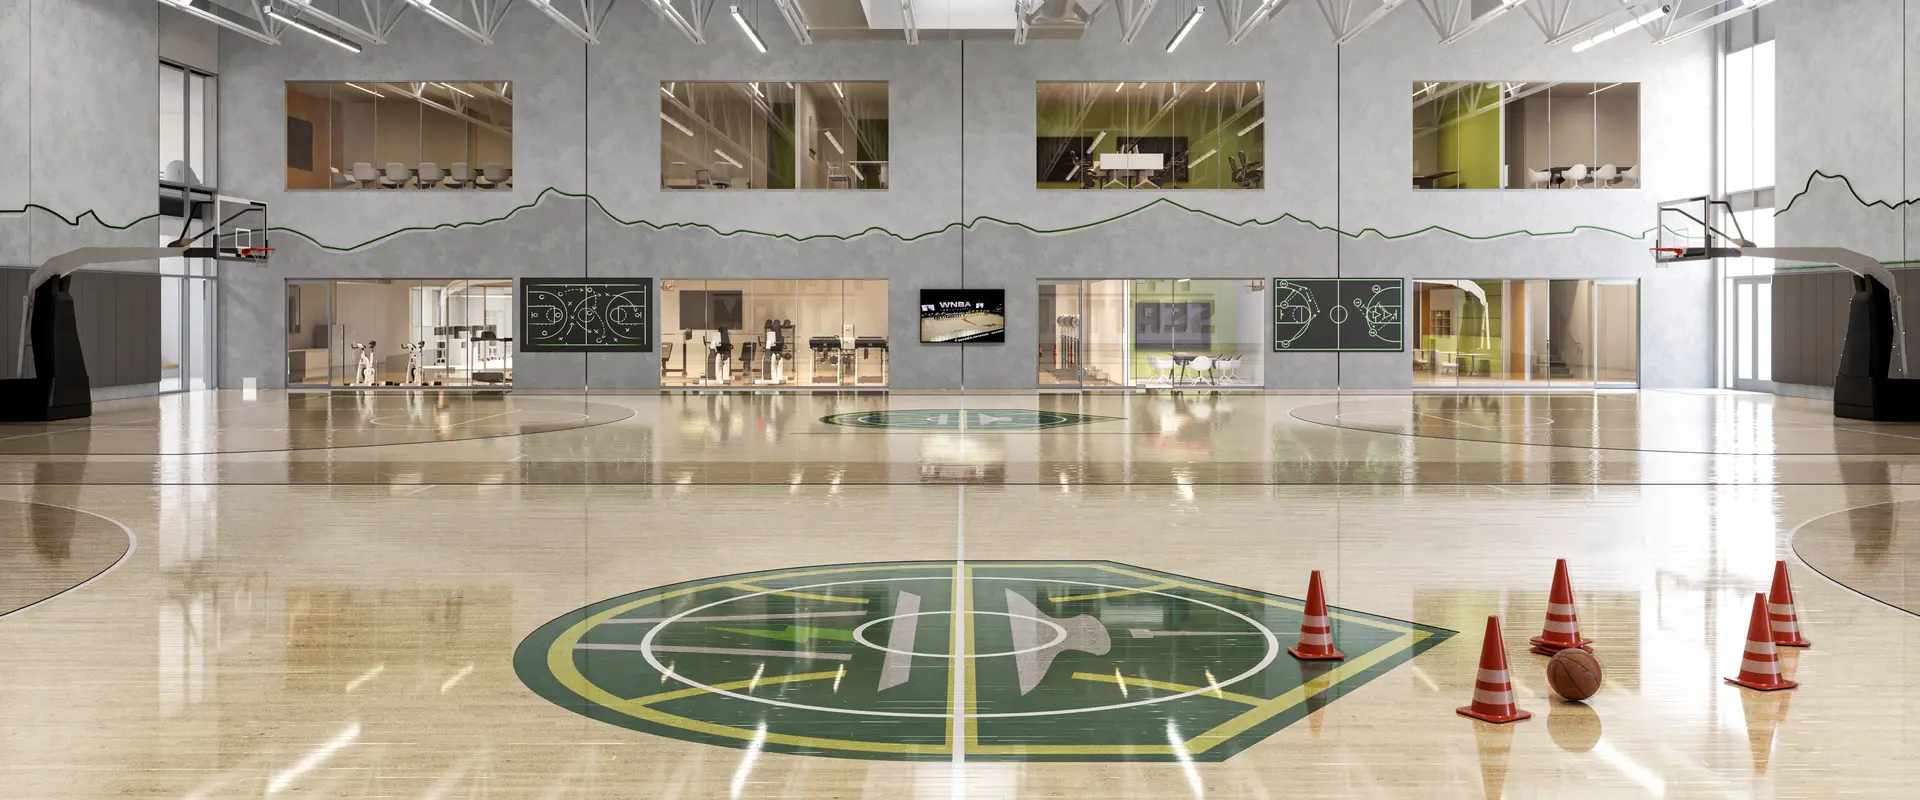 A rendering of an indoor basketball court.